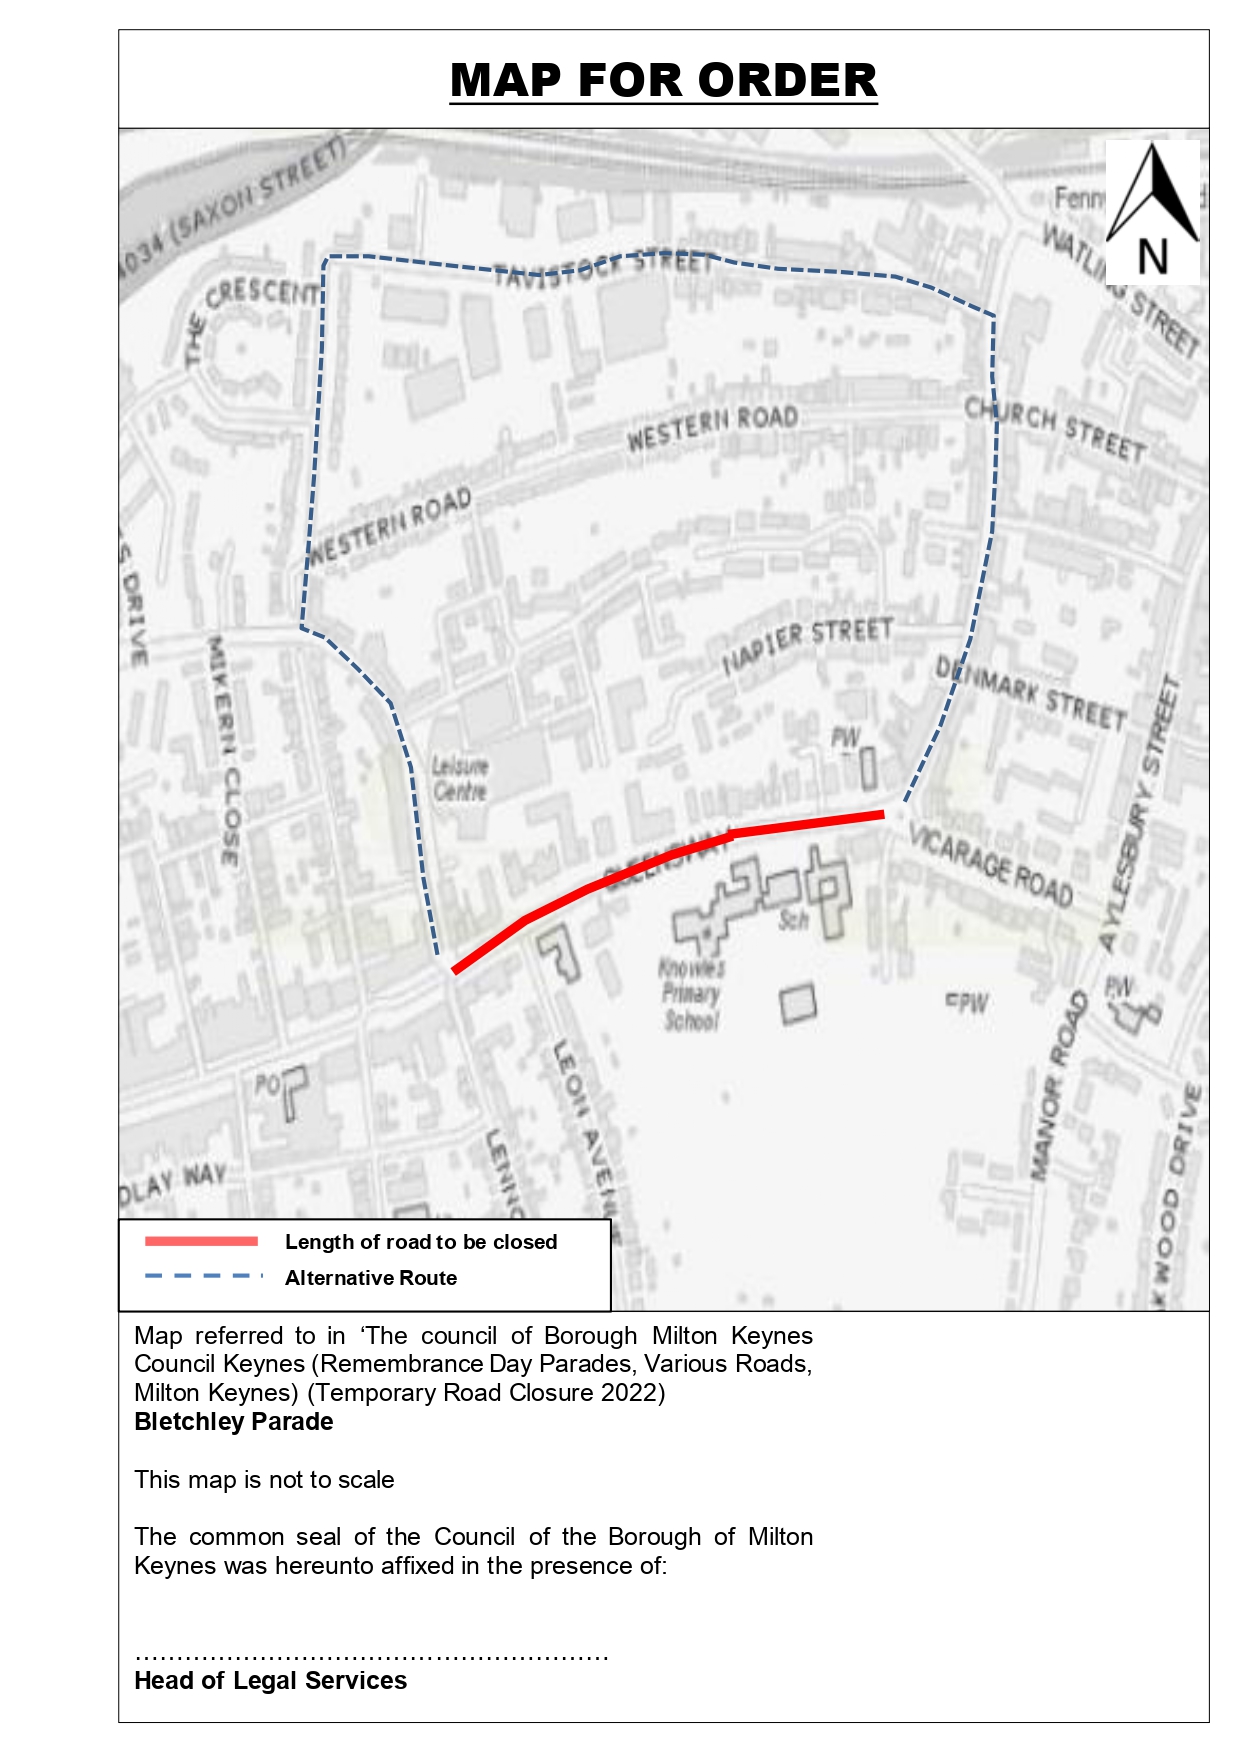 Image of Map for Road Closure for Remembrance Sunday